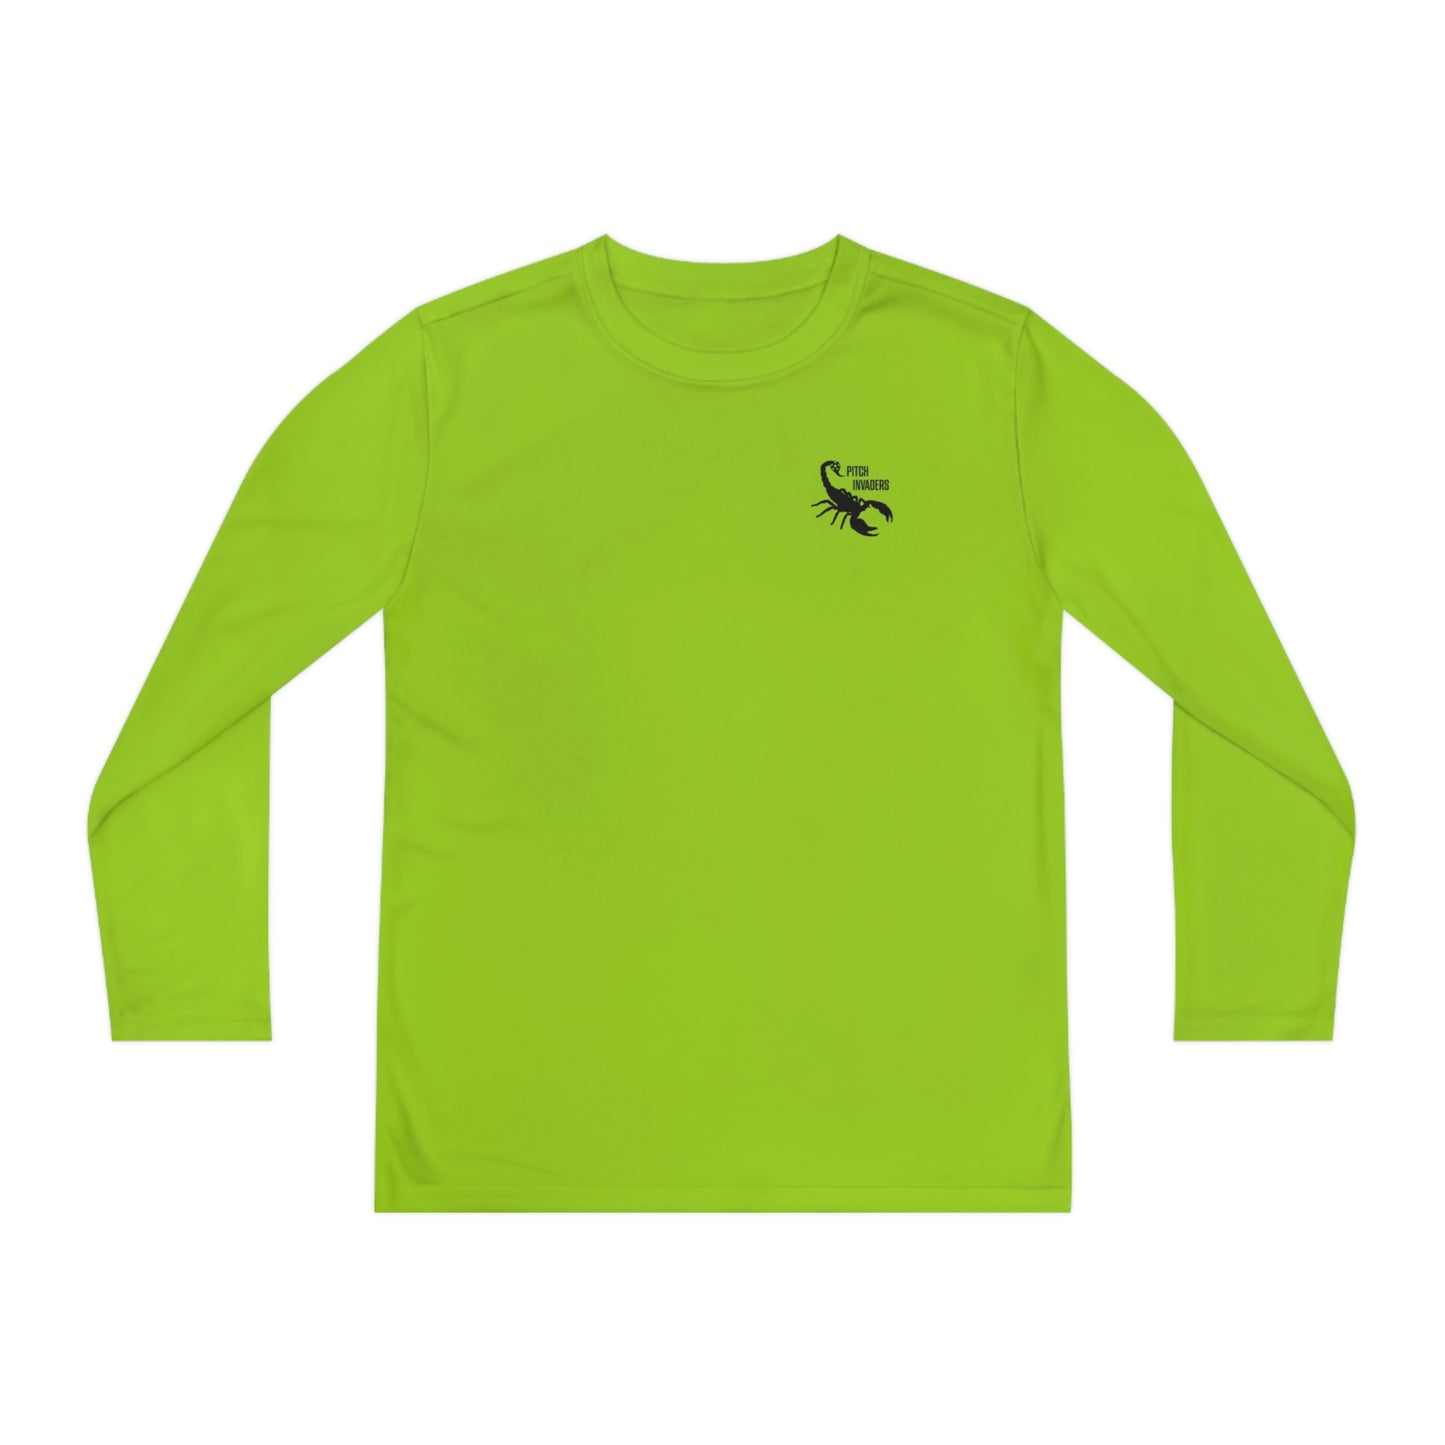 THE PITCH IS FOR THE PEOPLE Youth Athletic Long Sleeve (Unisex)